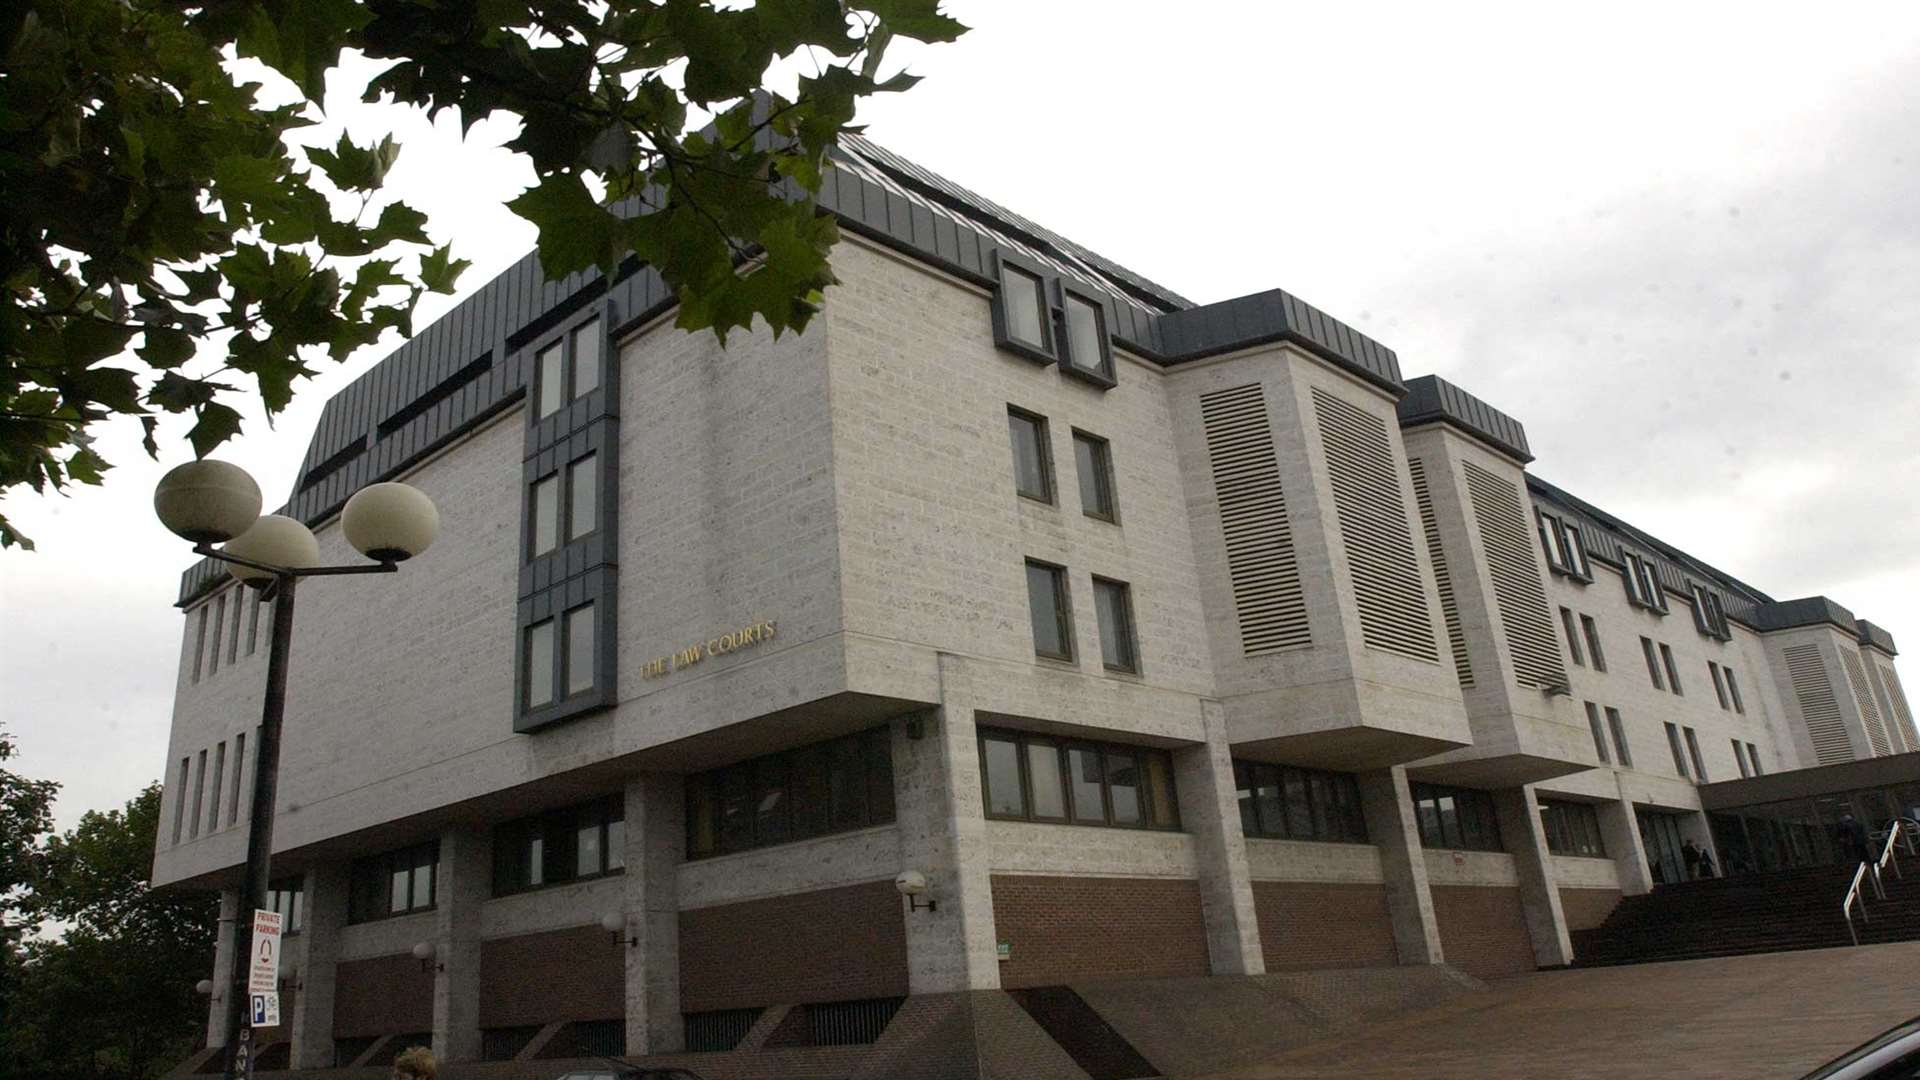 The pair were jailed at Maidstone Crown Court